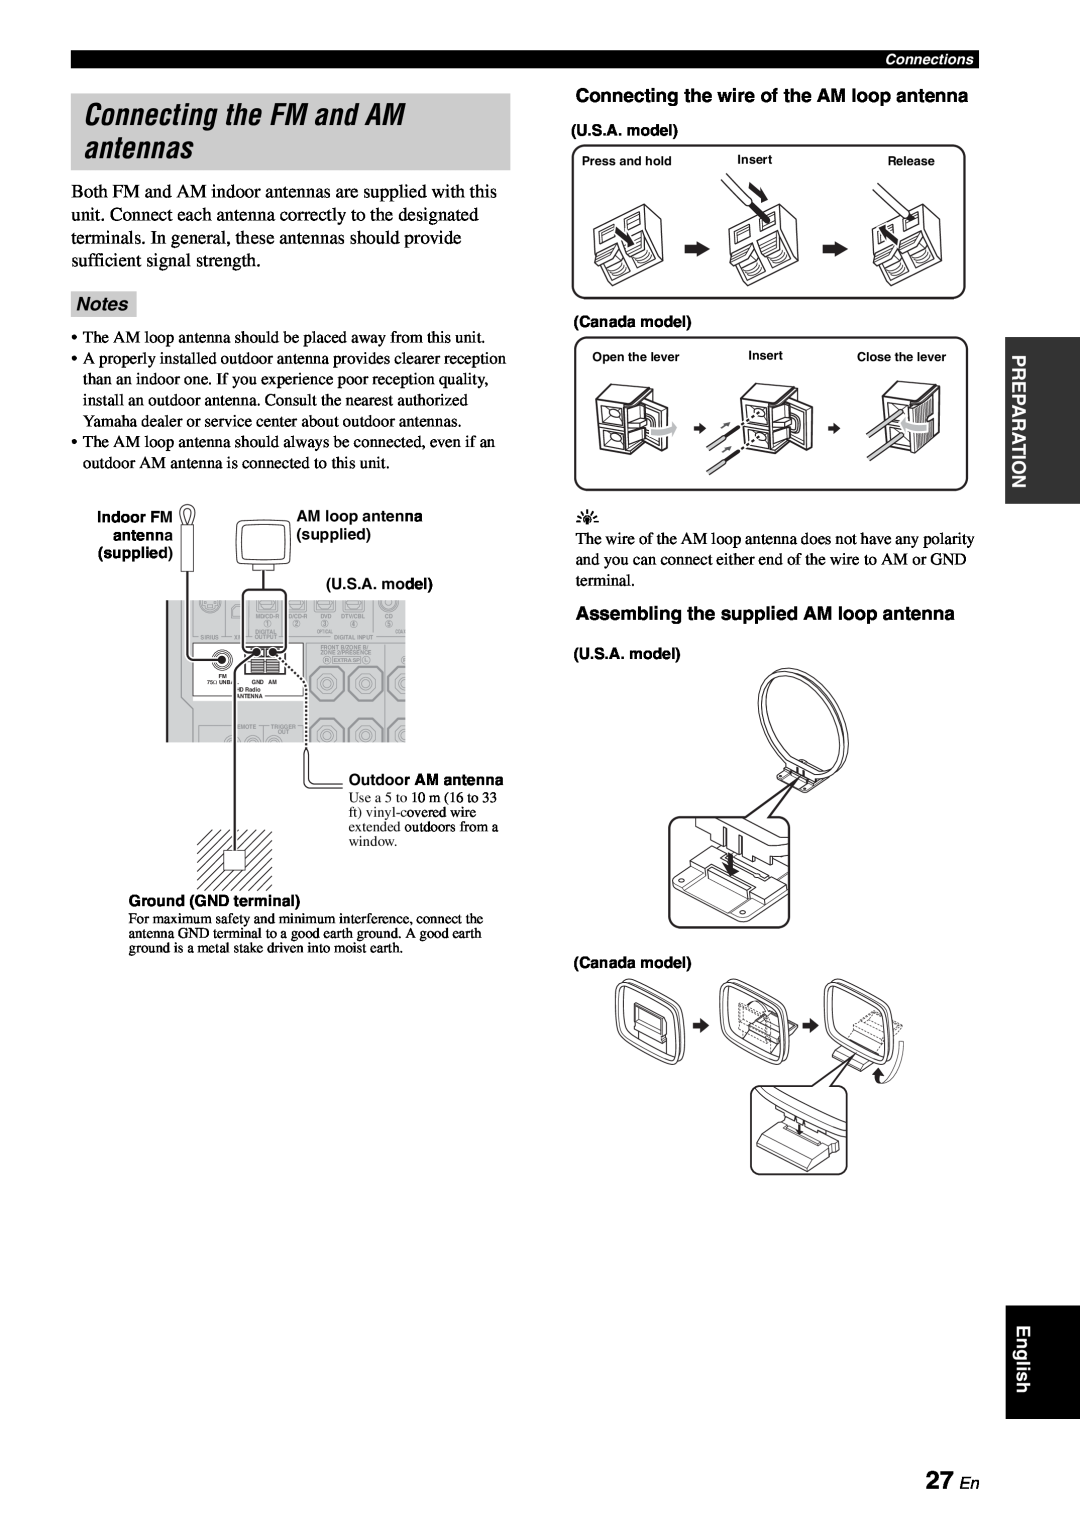 Yamaha RX-V863 owner manual Connecting the FM and AM antennas, 27 En, Notes 